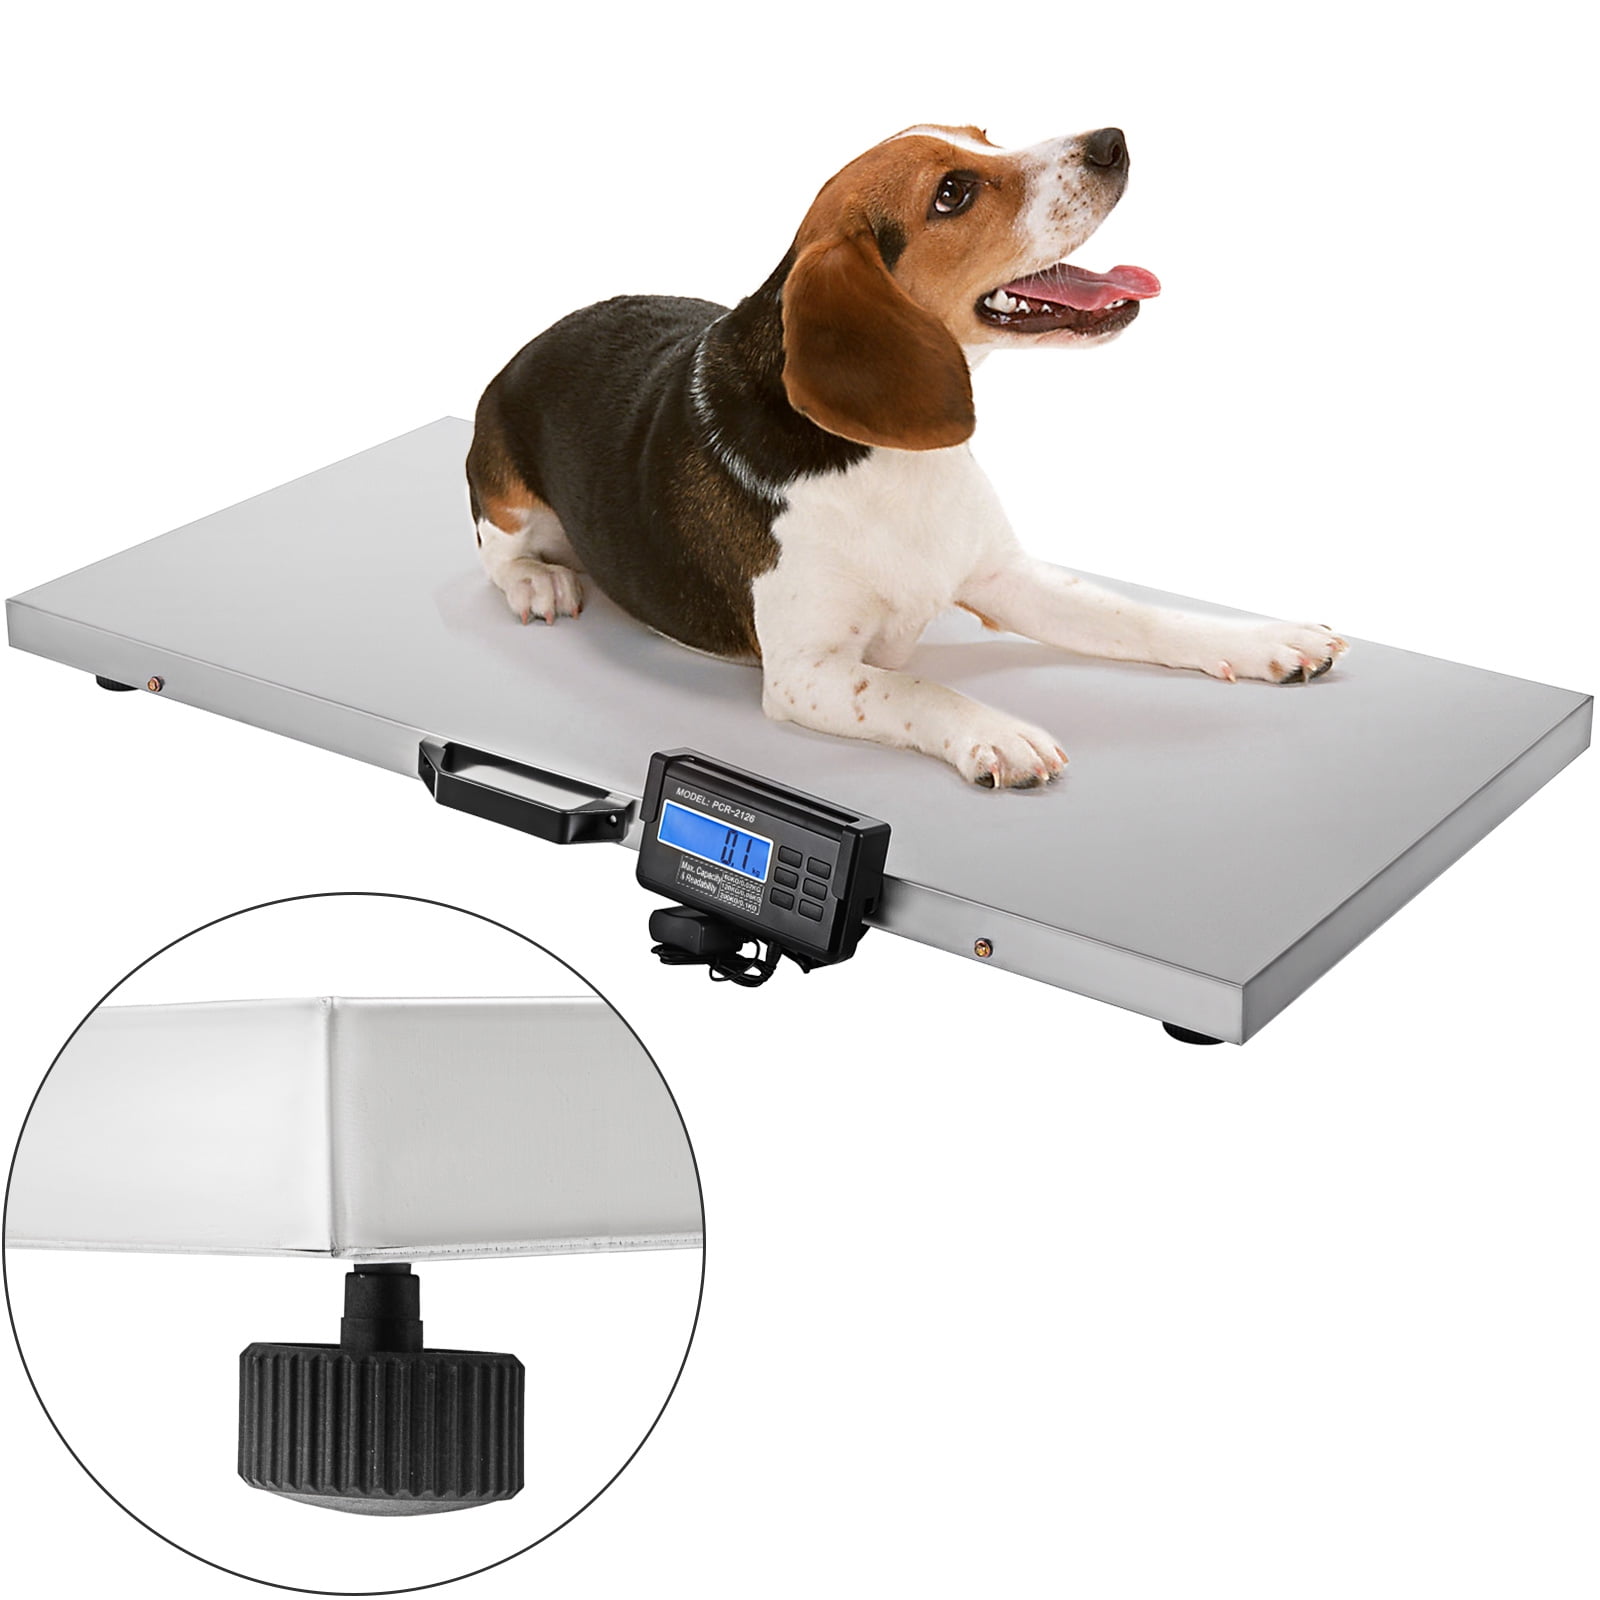 Postal Scale Pet Scale Dog Scales for Large Breed Shipping Scale for Packages Digital Livestock Scale Stainless Steel Platform Electronic Heavy Duty